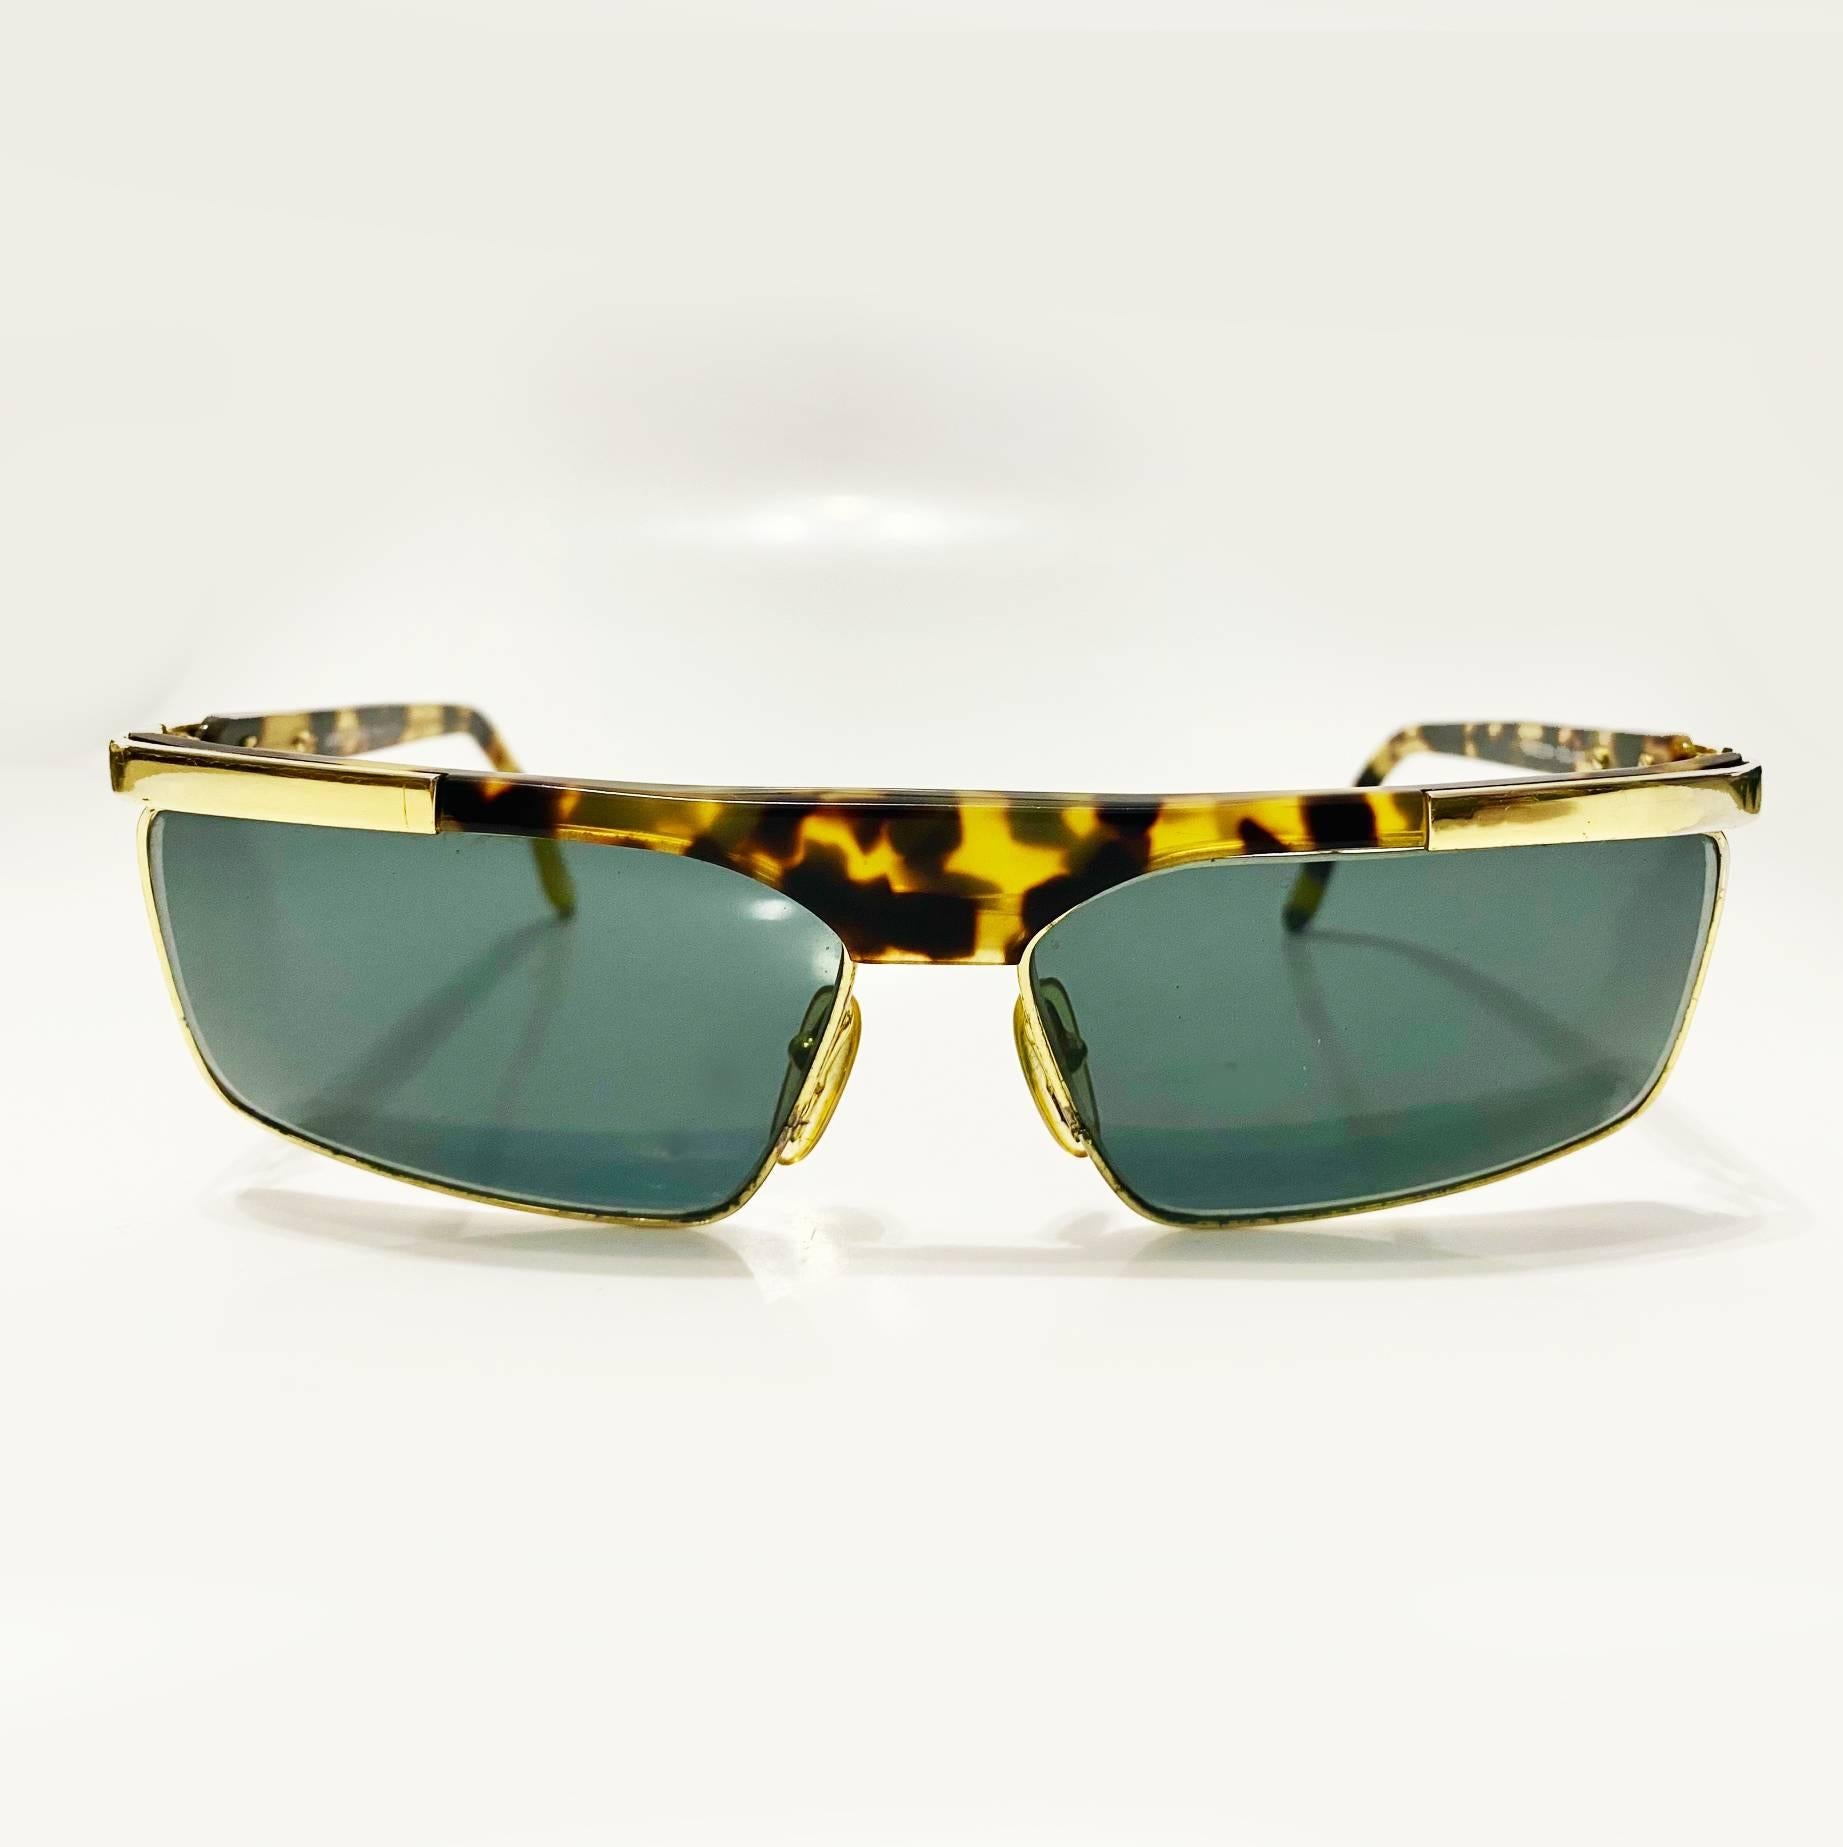 An iconic piece from the '90s, these Versace sunglasses feature a gold-tone metal frame with straight lines and brown lenses complemented by a tortoiseshell finish.

Condition: vintage, 1990s, very good, minimal wear 